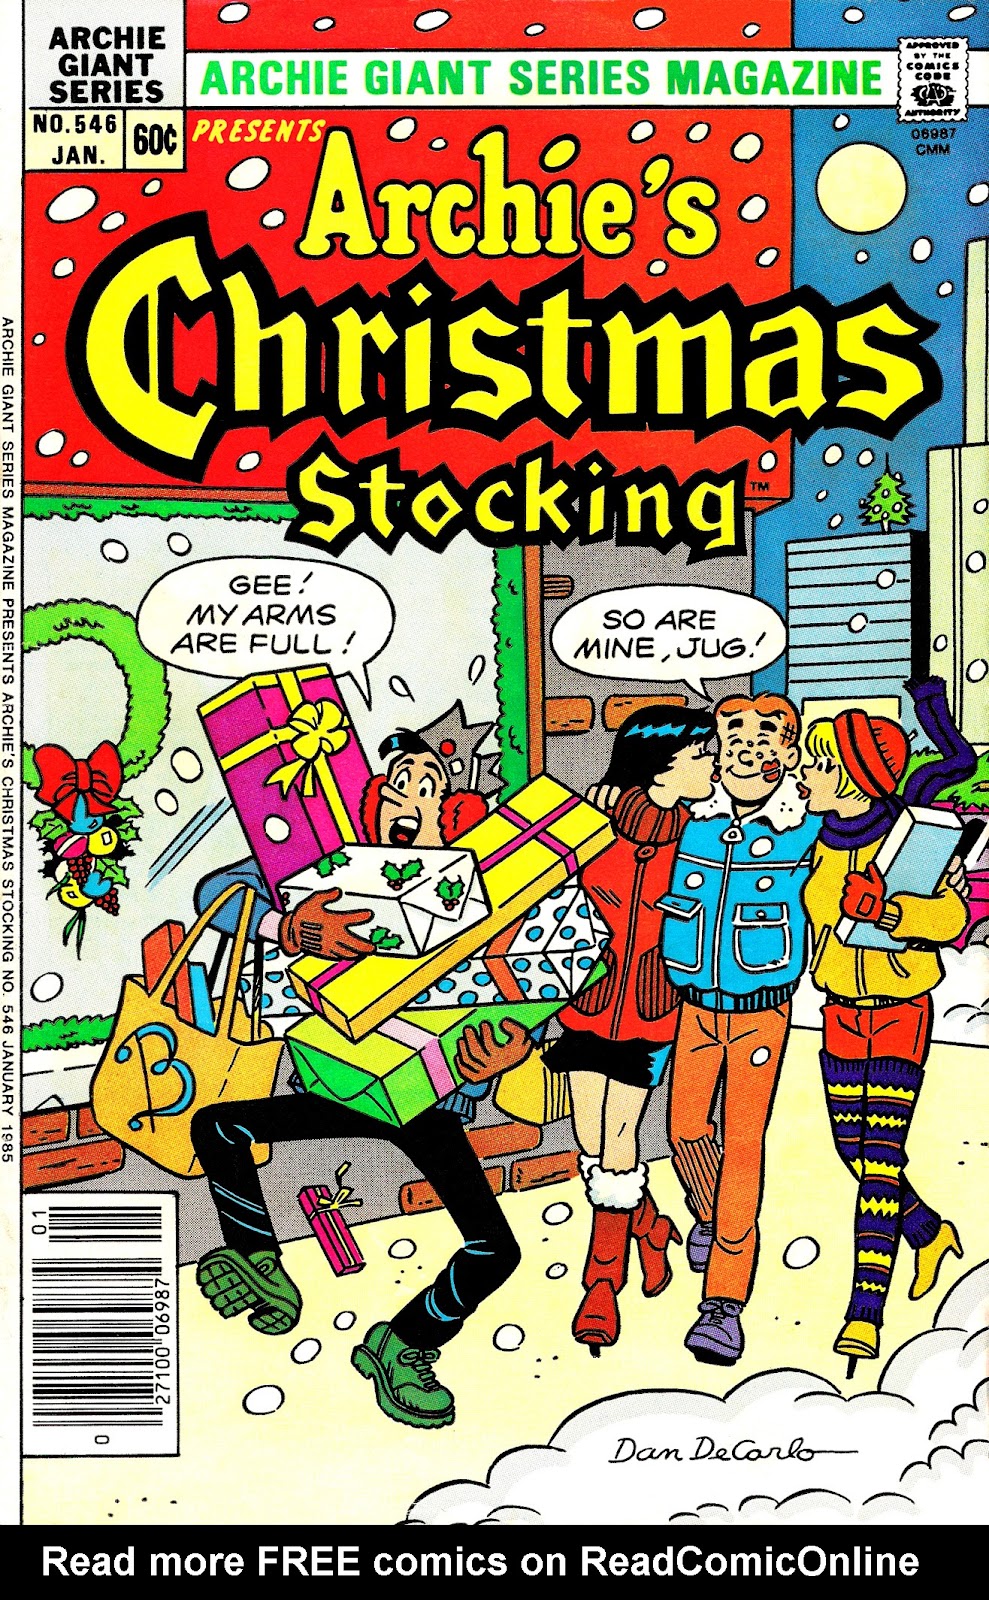 Archie Giant Series Magazine issue 546 - Page 1